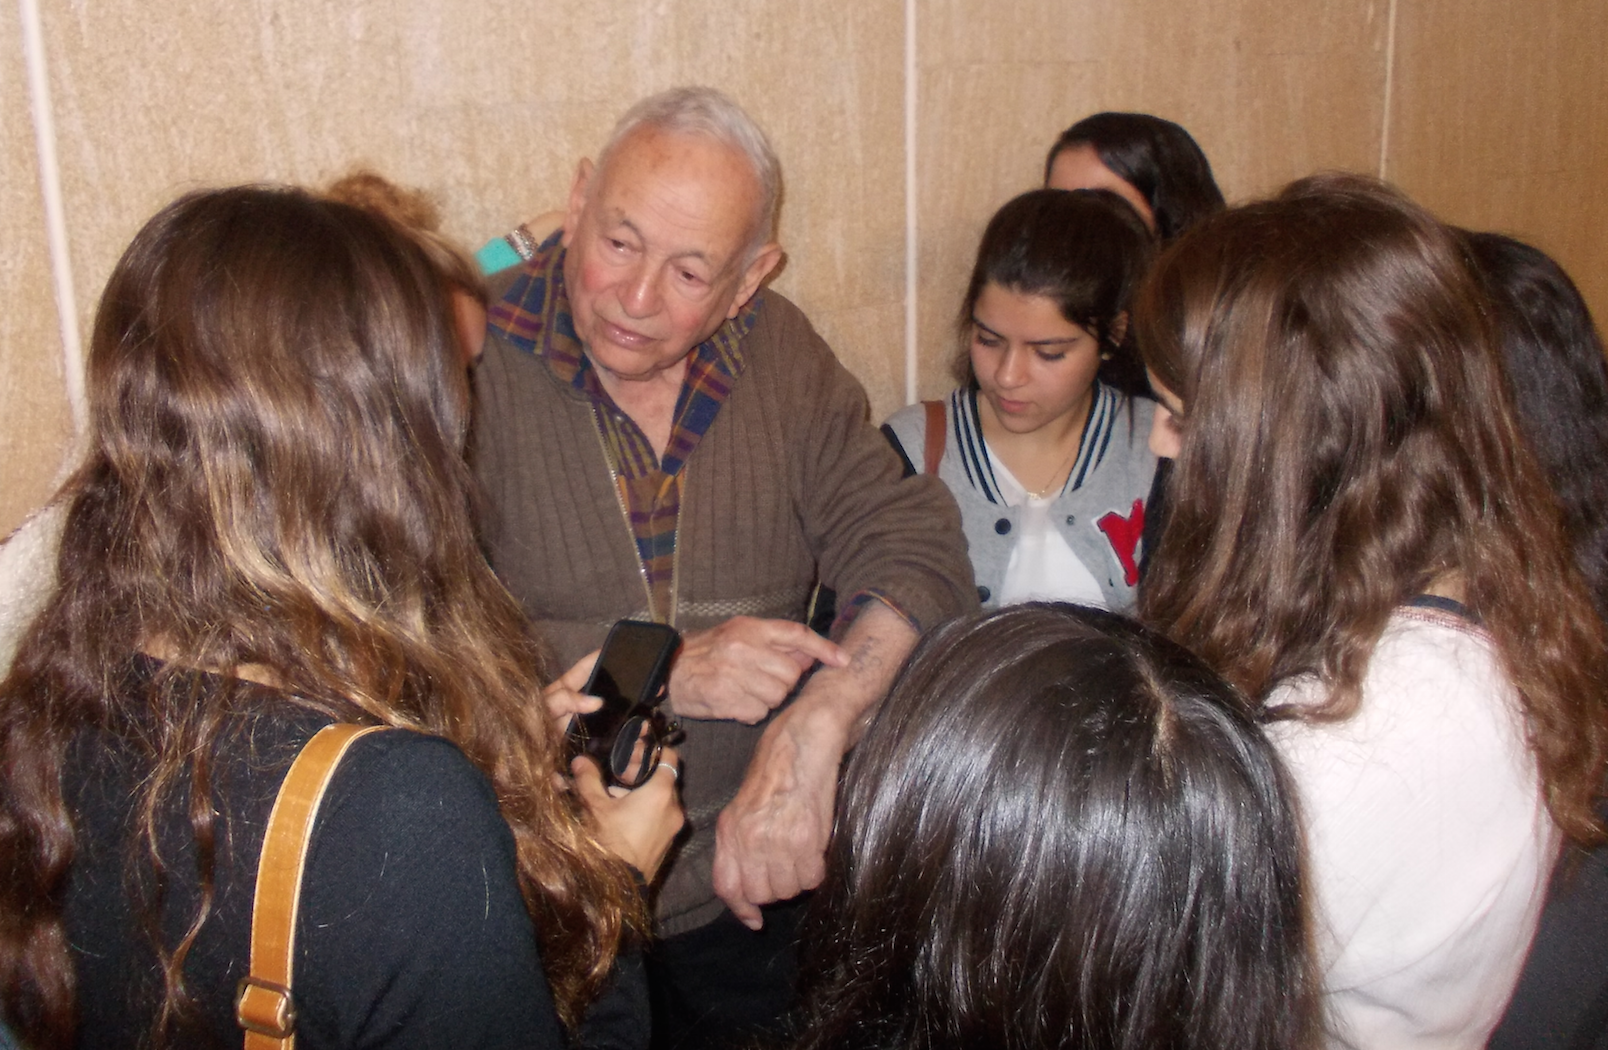 Thomas Geve shows students his concentration camp tattoo